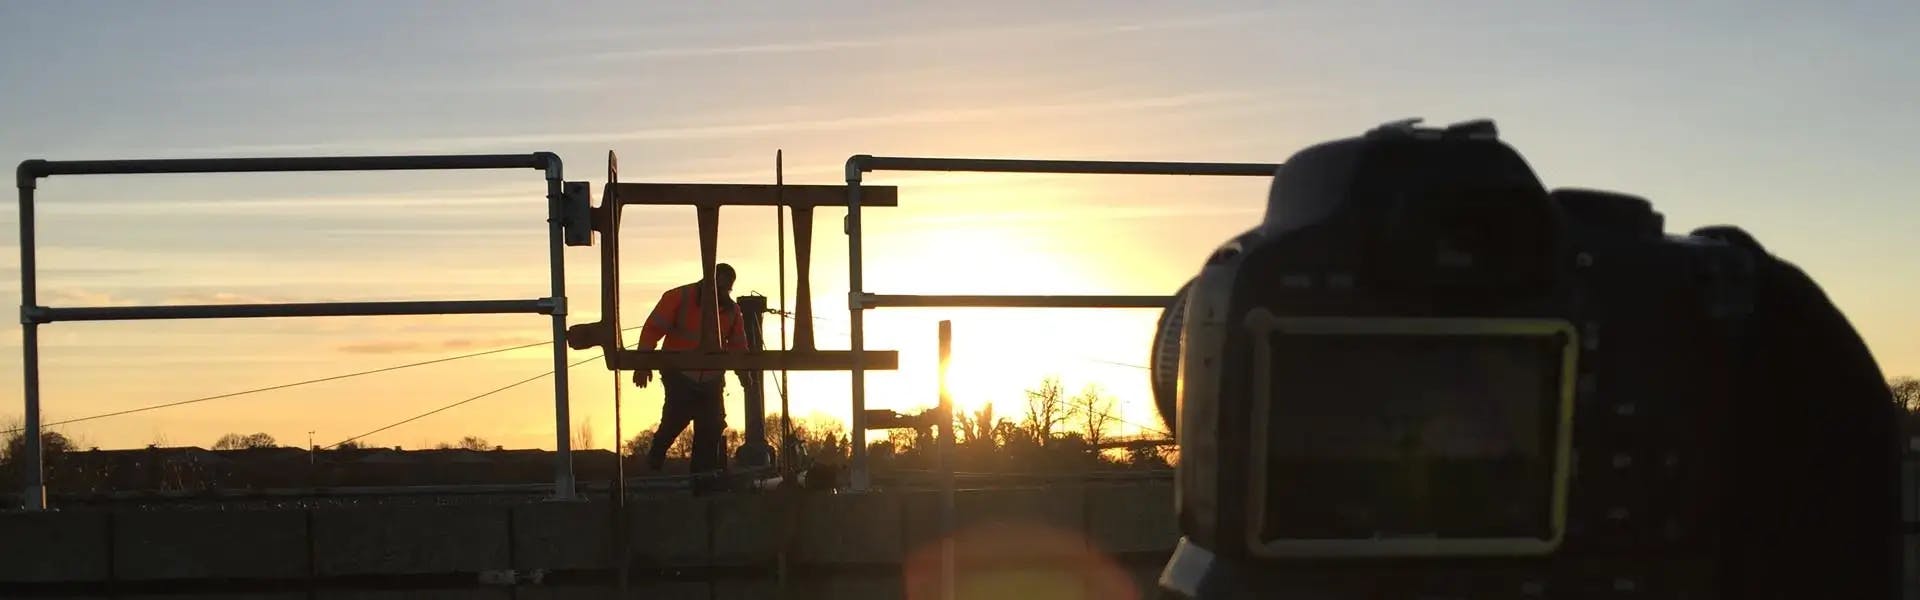 Sunset shot of worker operating water filtering equipment on training film shoot